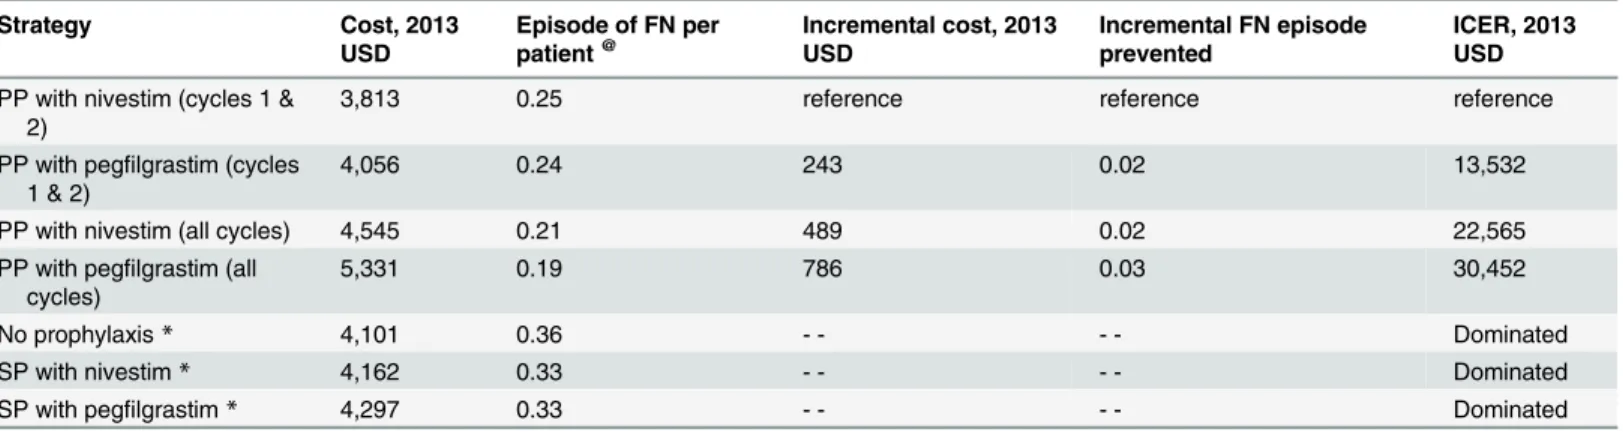 Table 3 shows the total and incremental health outcomes and costs associated with all seven FN management strategies (cost per FN episode prevented as the main outcome)